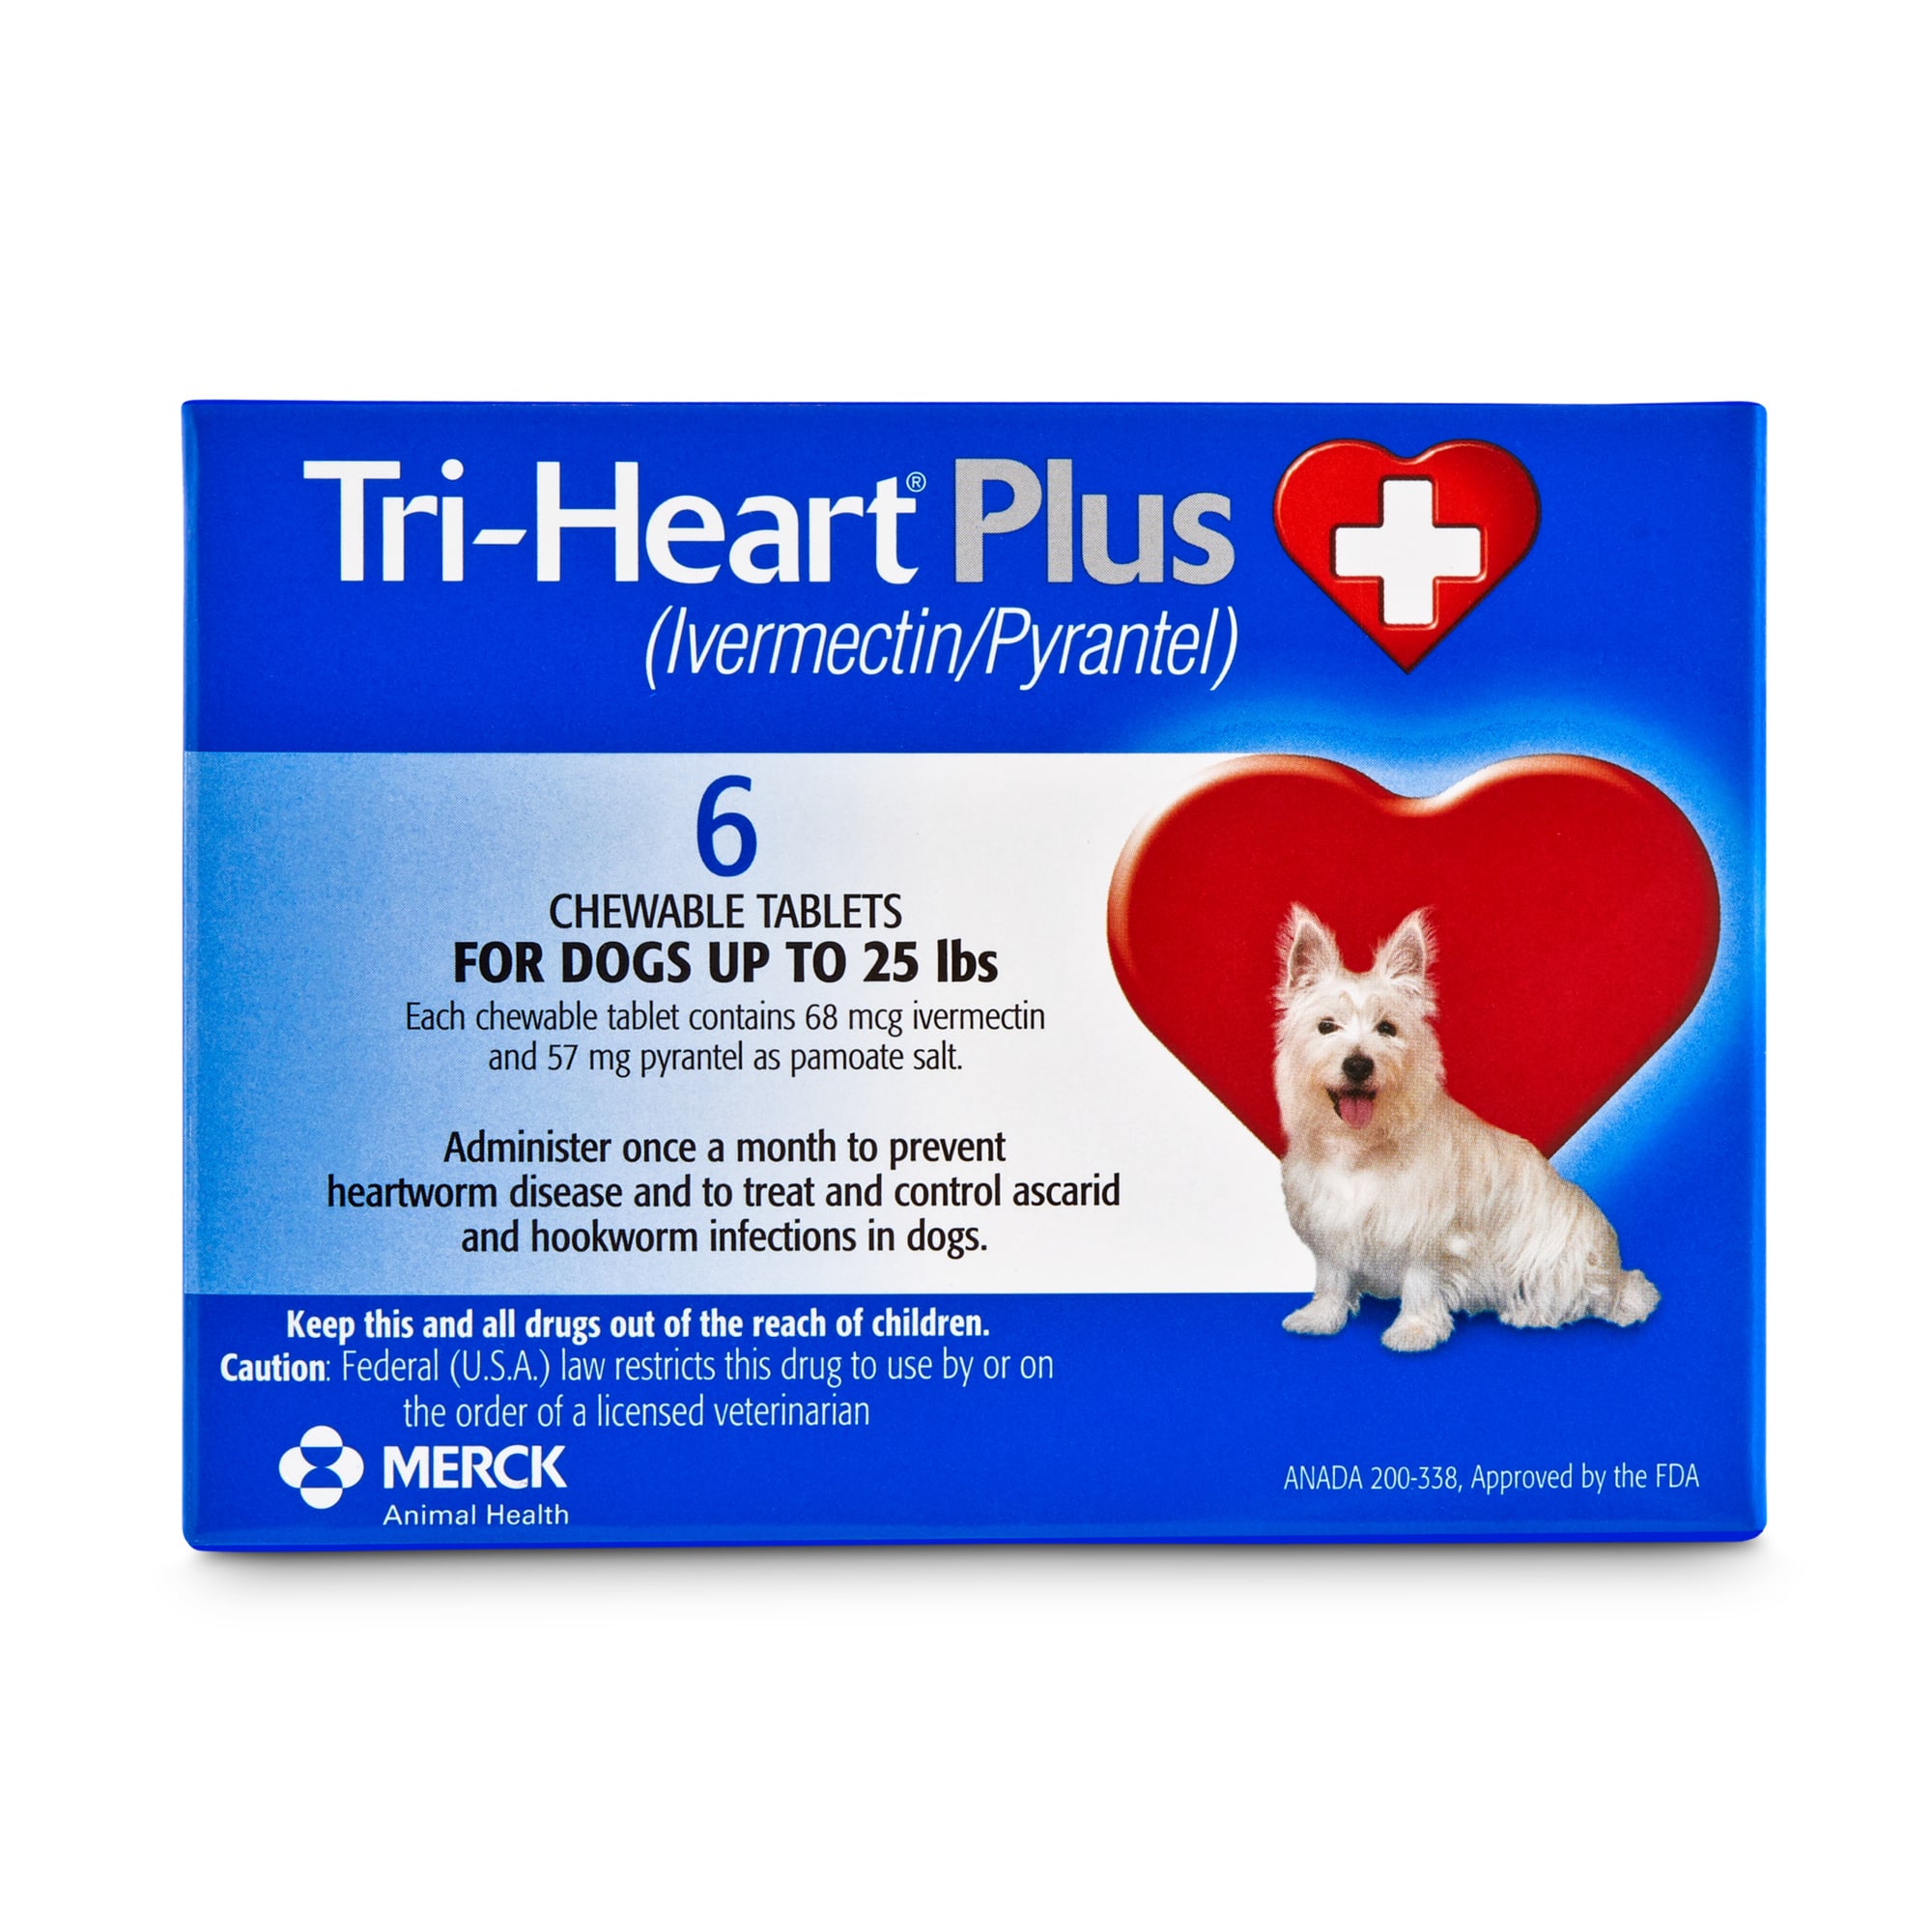 Tri-Heart Plus Chewable Tablets for 